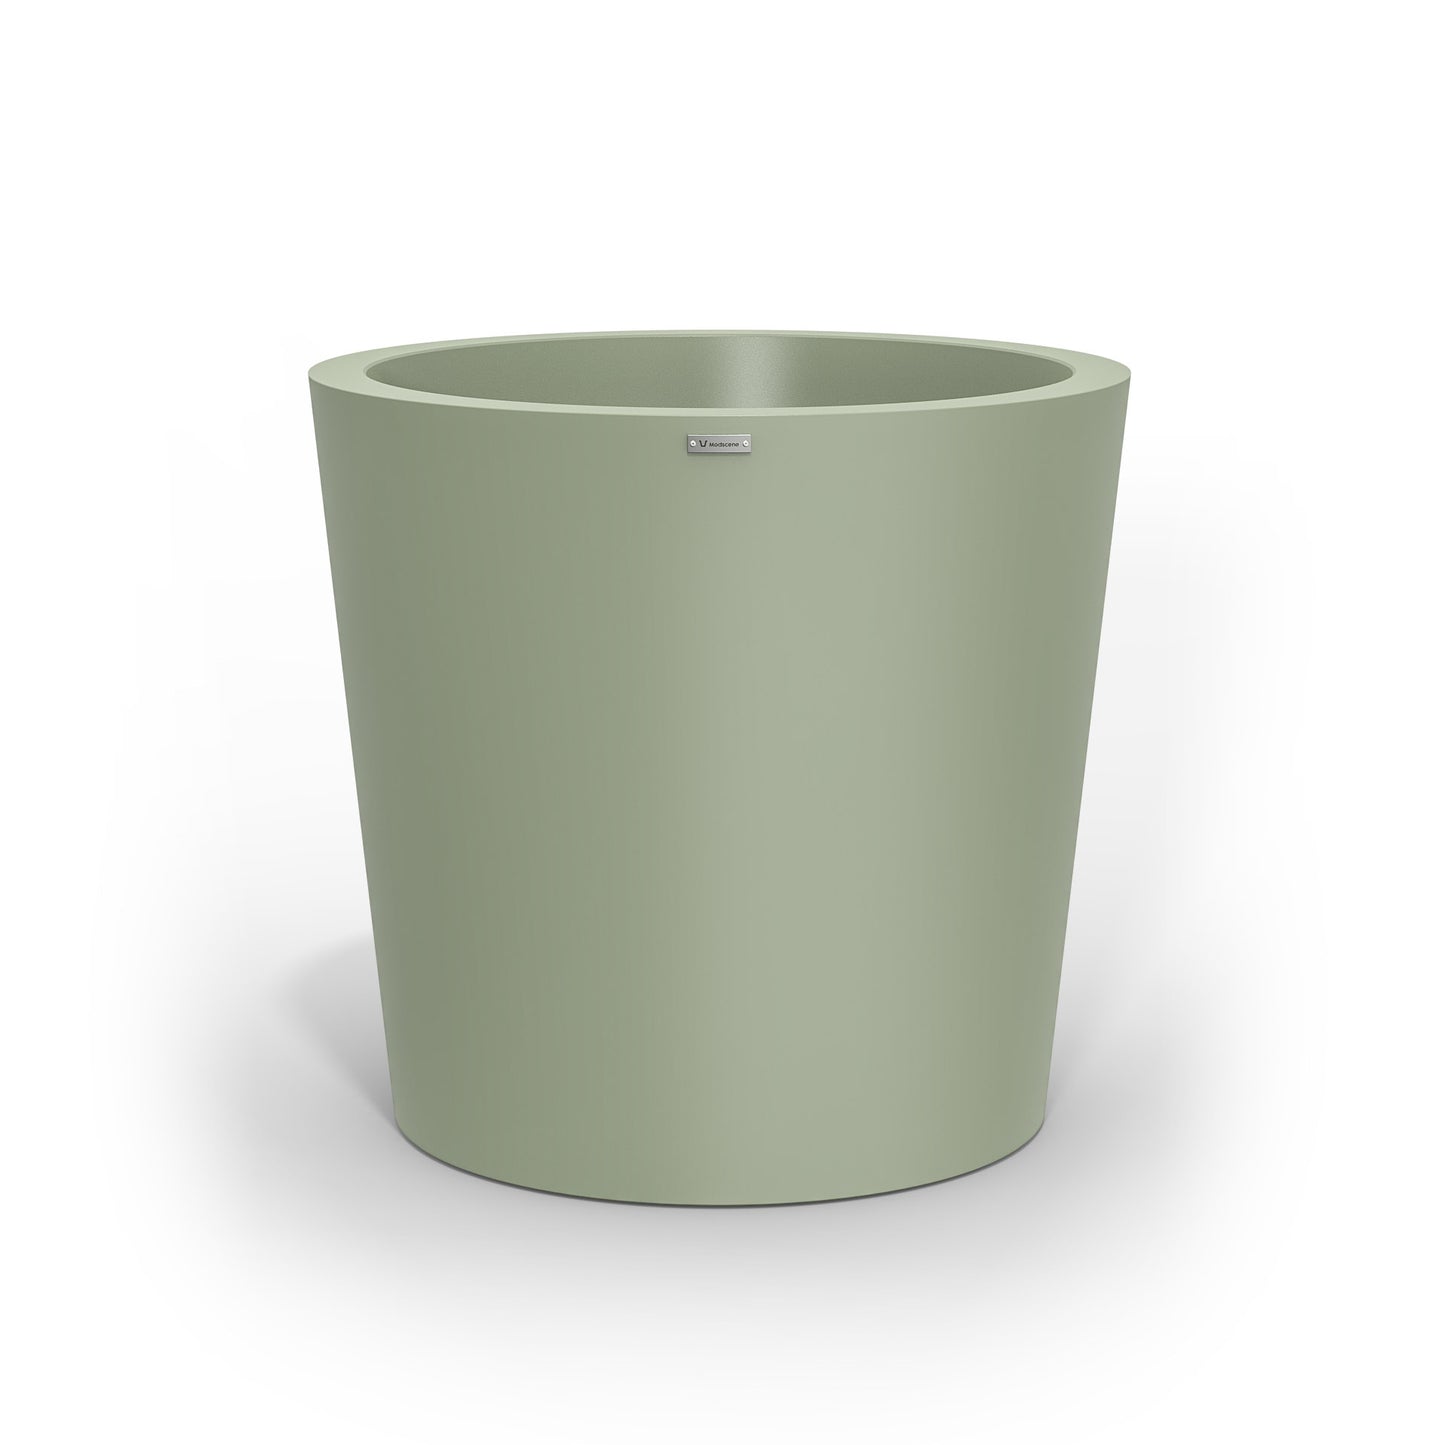 A large Modscene pot planter in a pastel green colour.